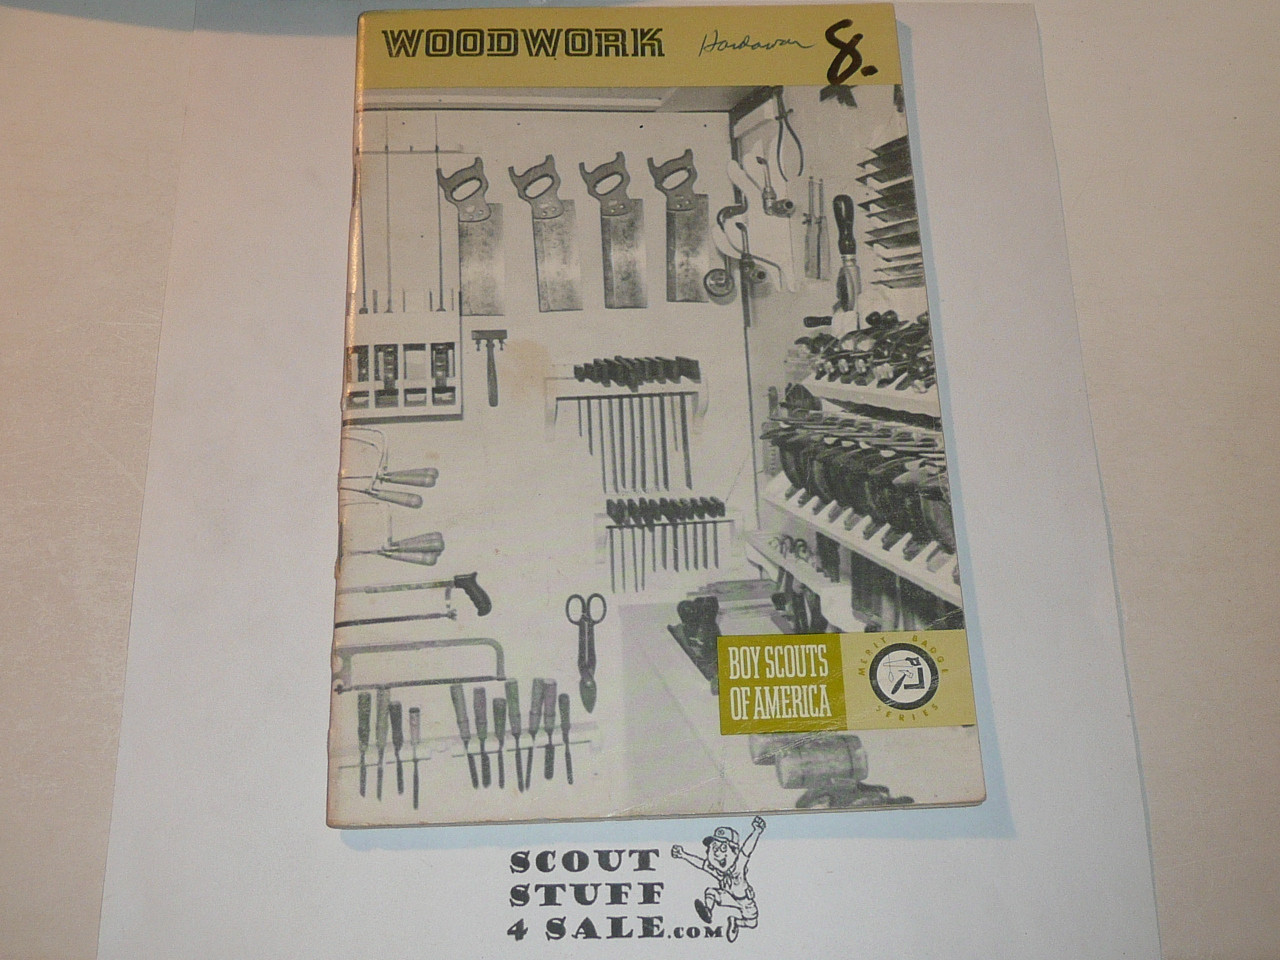 Woodwork Merit Badge Pamphlet, Type 8, Green Band Cover, 6-77 Printing